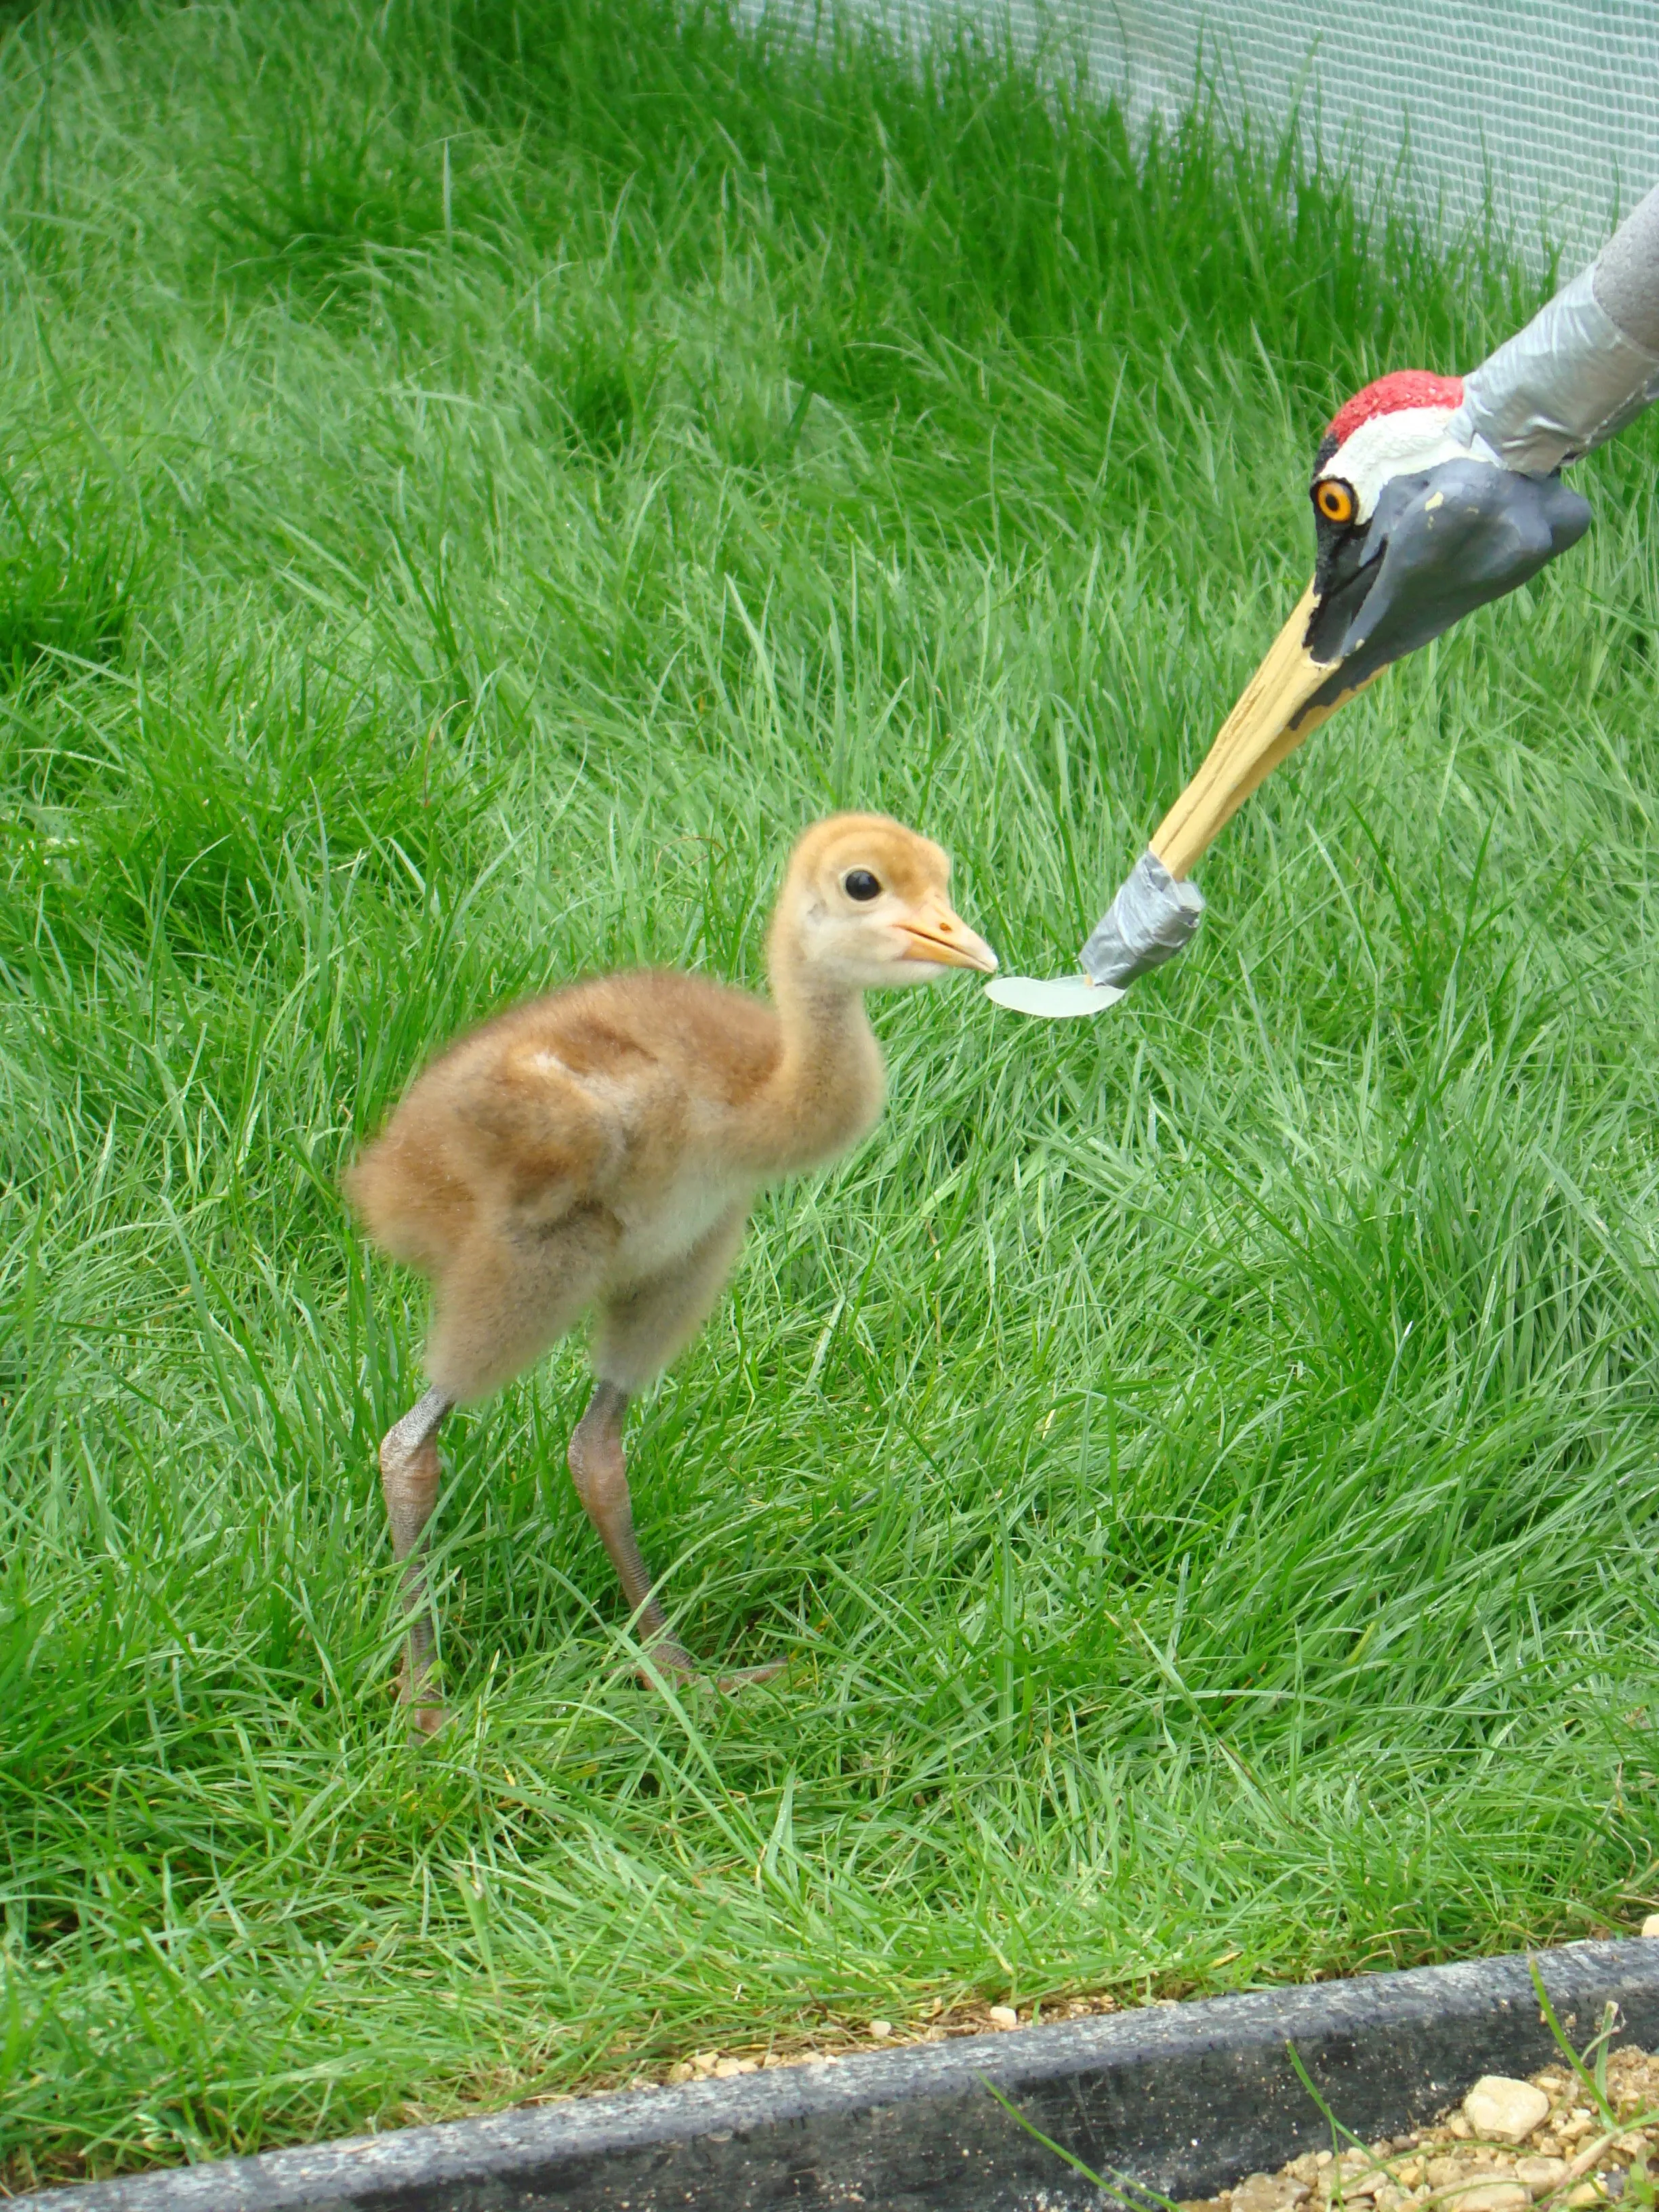 A Crane chick is fed on the grass by a rearing puppet